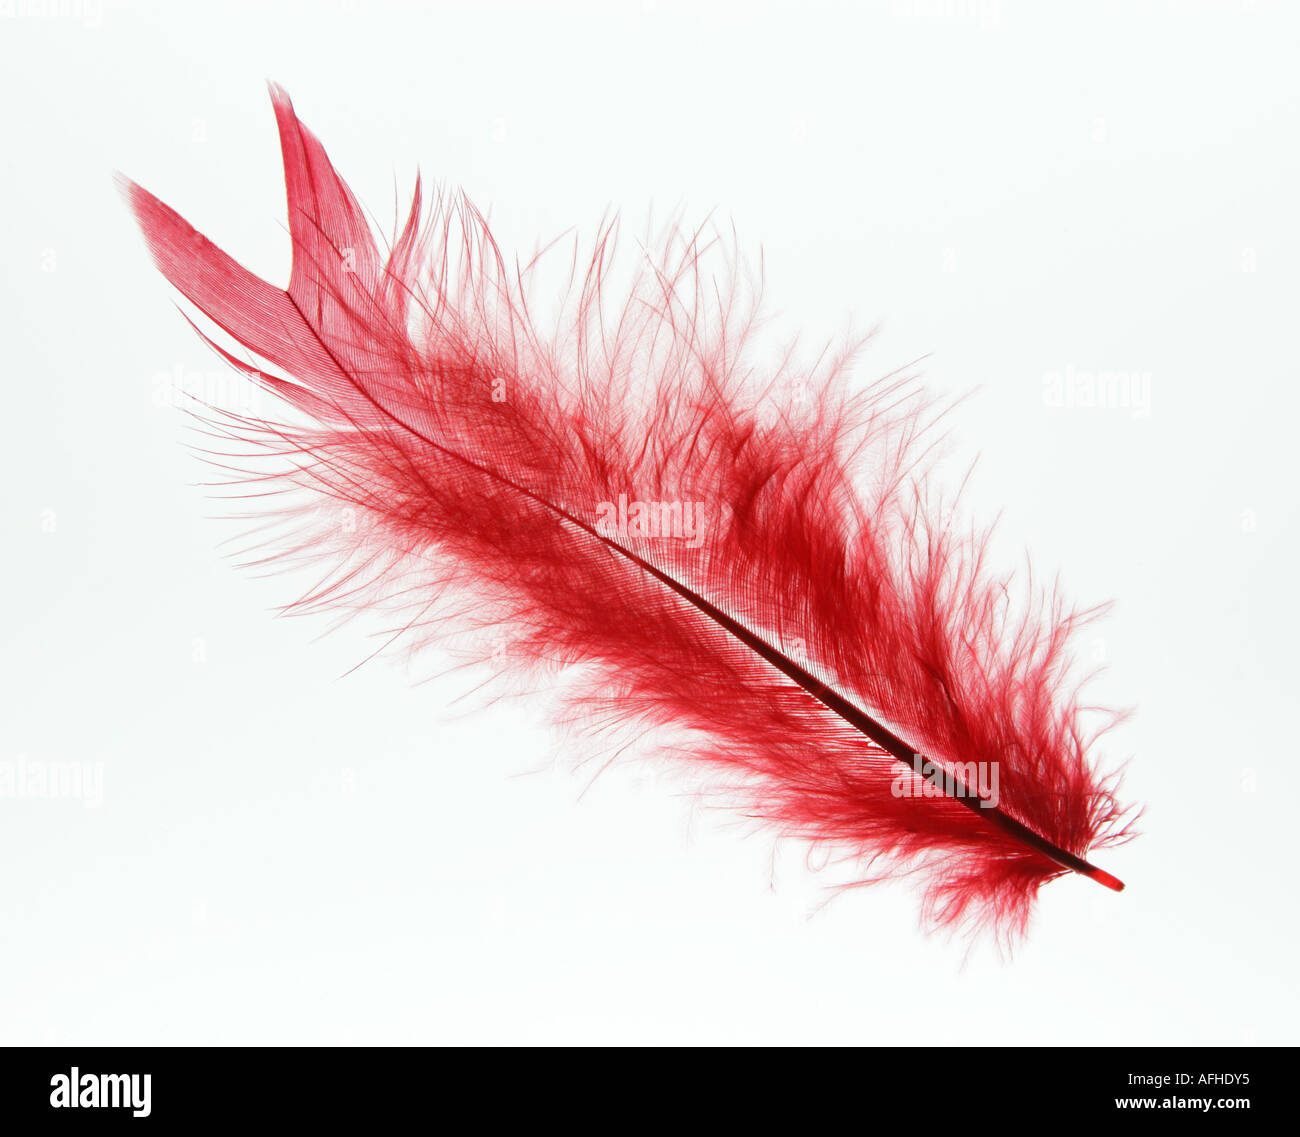 A Red Marabou Feather photographed on a light box showing delicate detail. Stock Photo